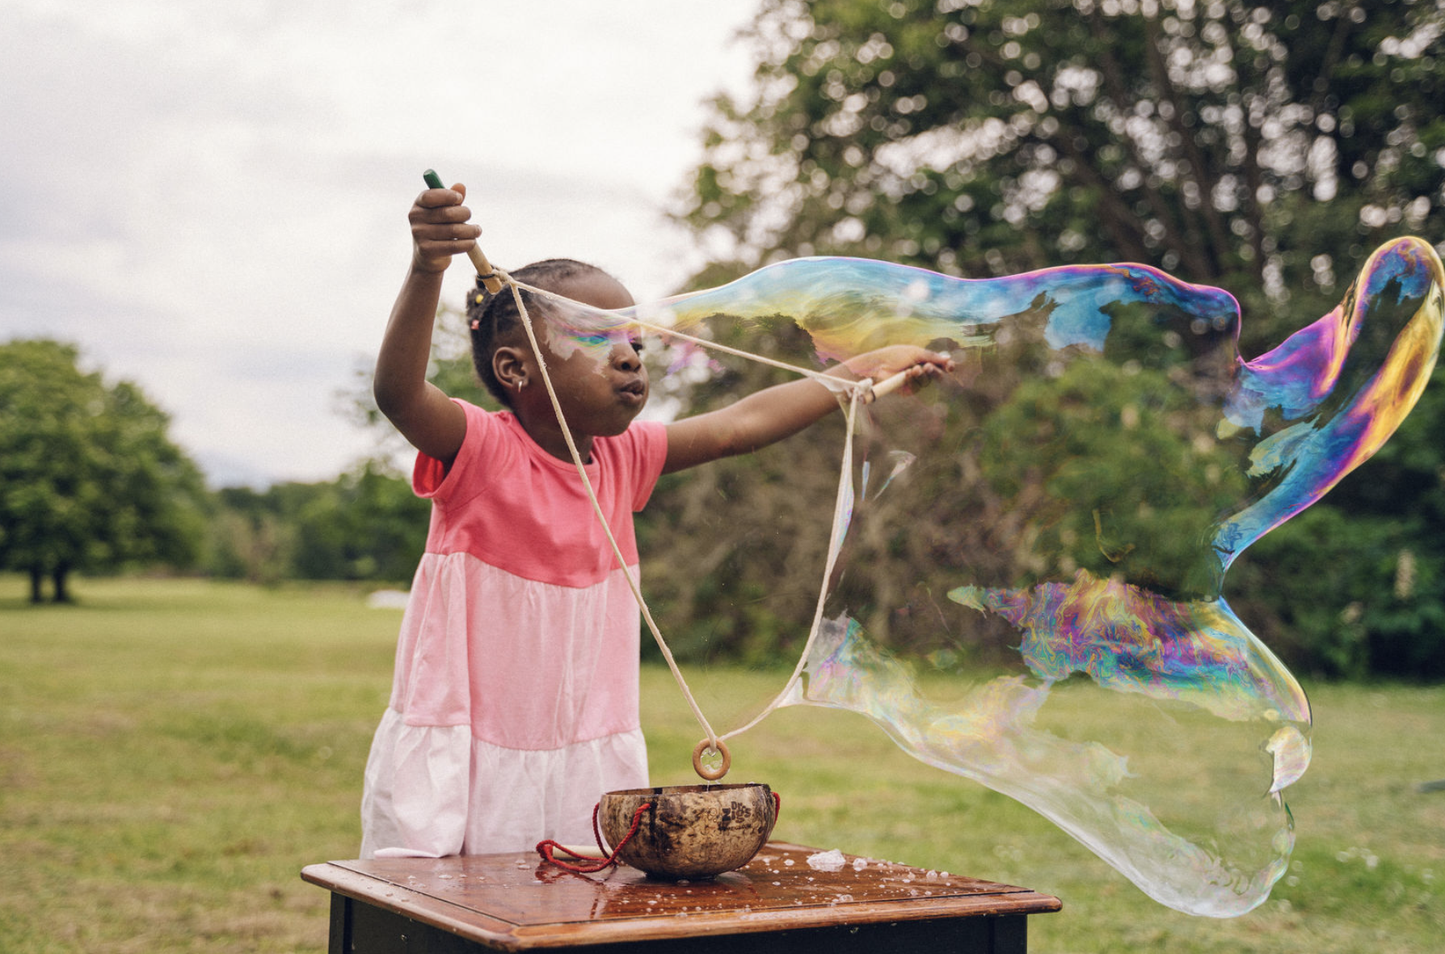 Child blowing a giant bubble with the coconut bucket kit